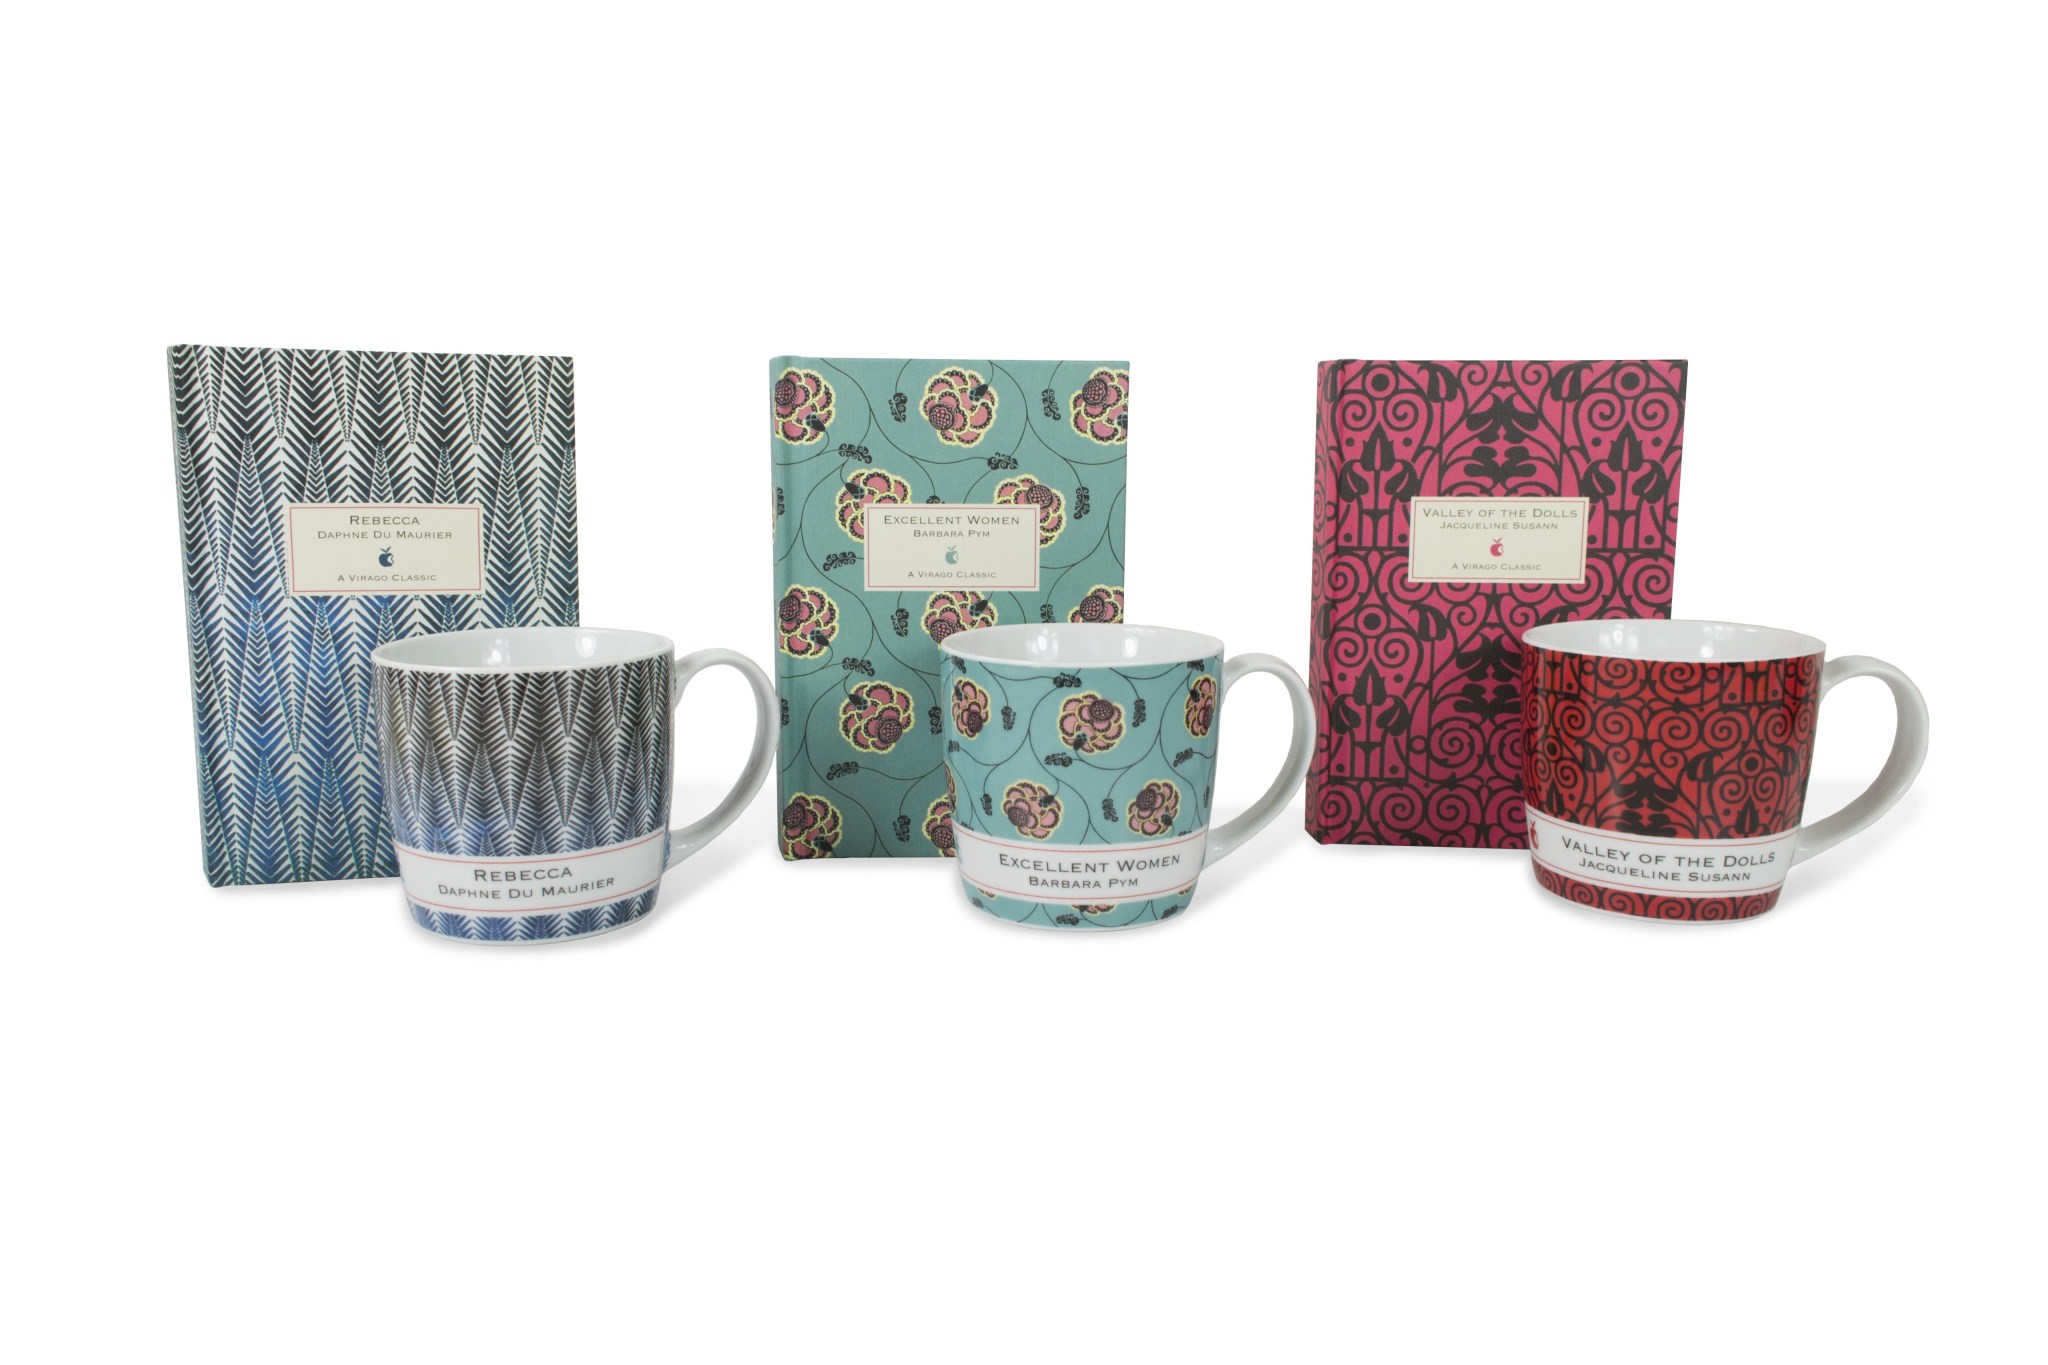 ALL MUGS AND NOTEBOOKS